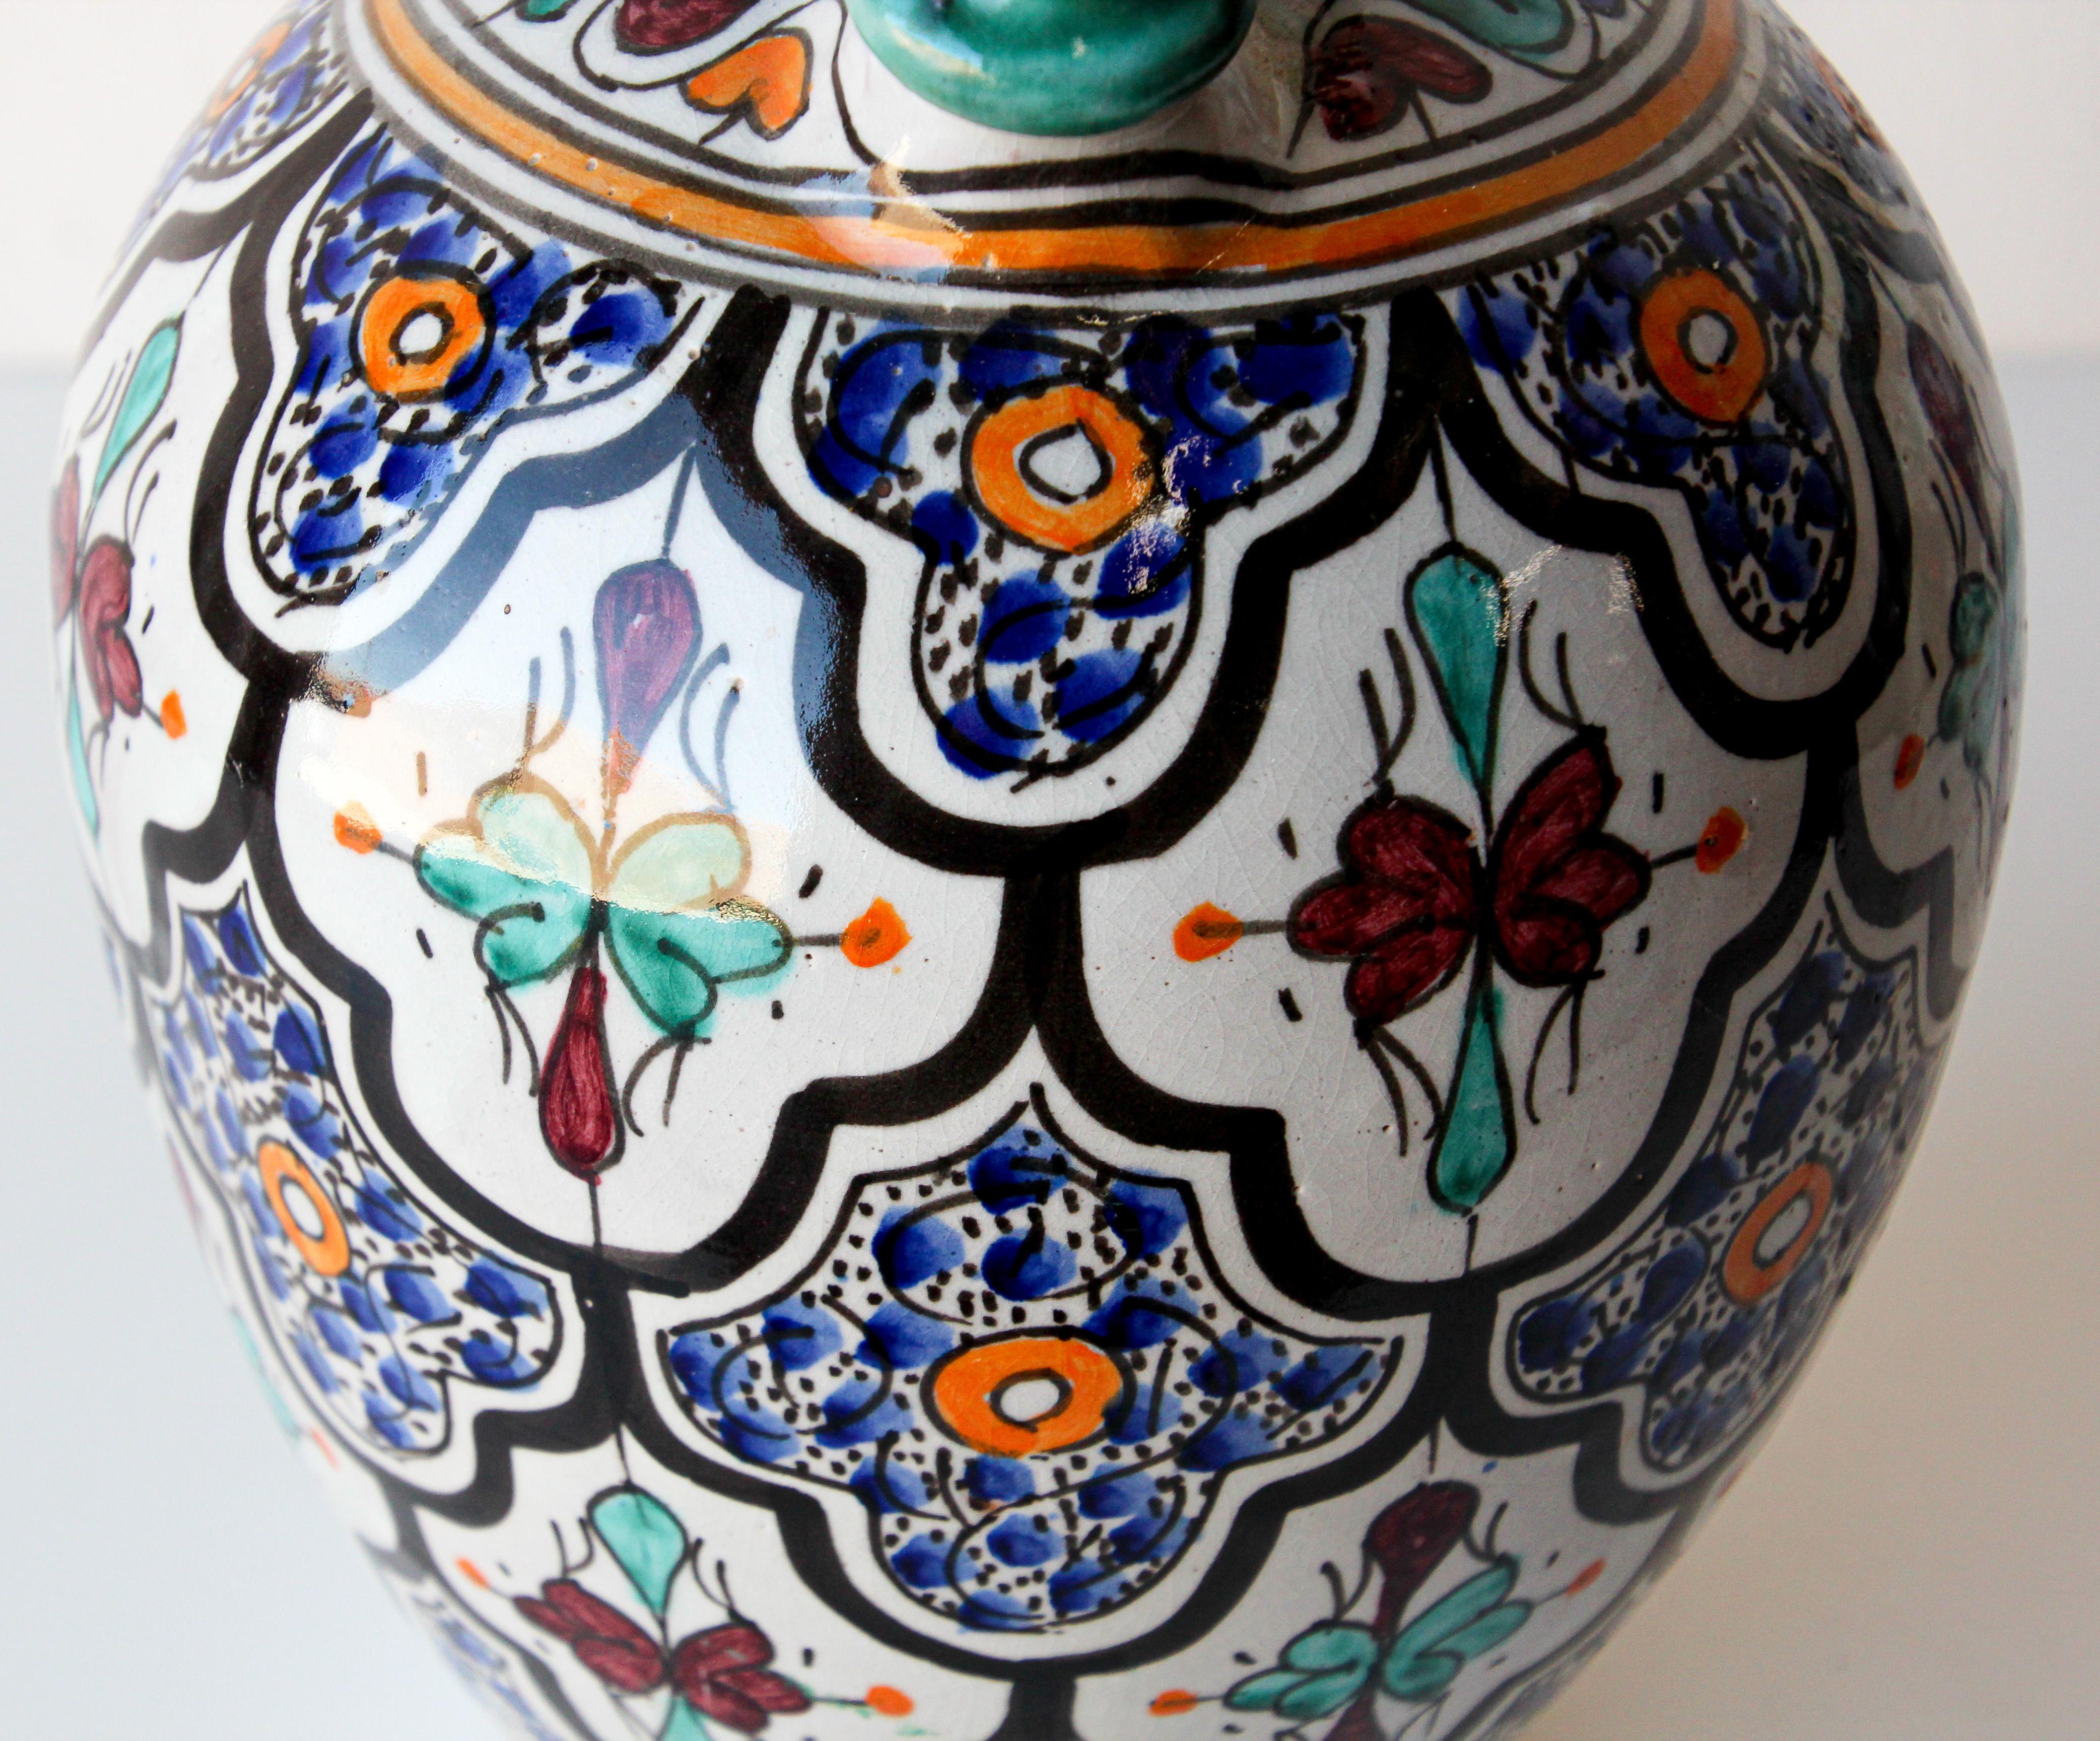 Moorish Ceramic Glazed Water Jug Handcrafted in Fez Morocco For Sale 4